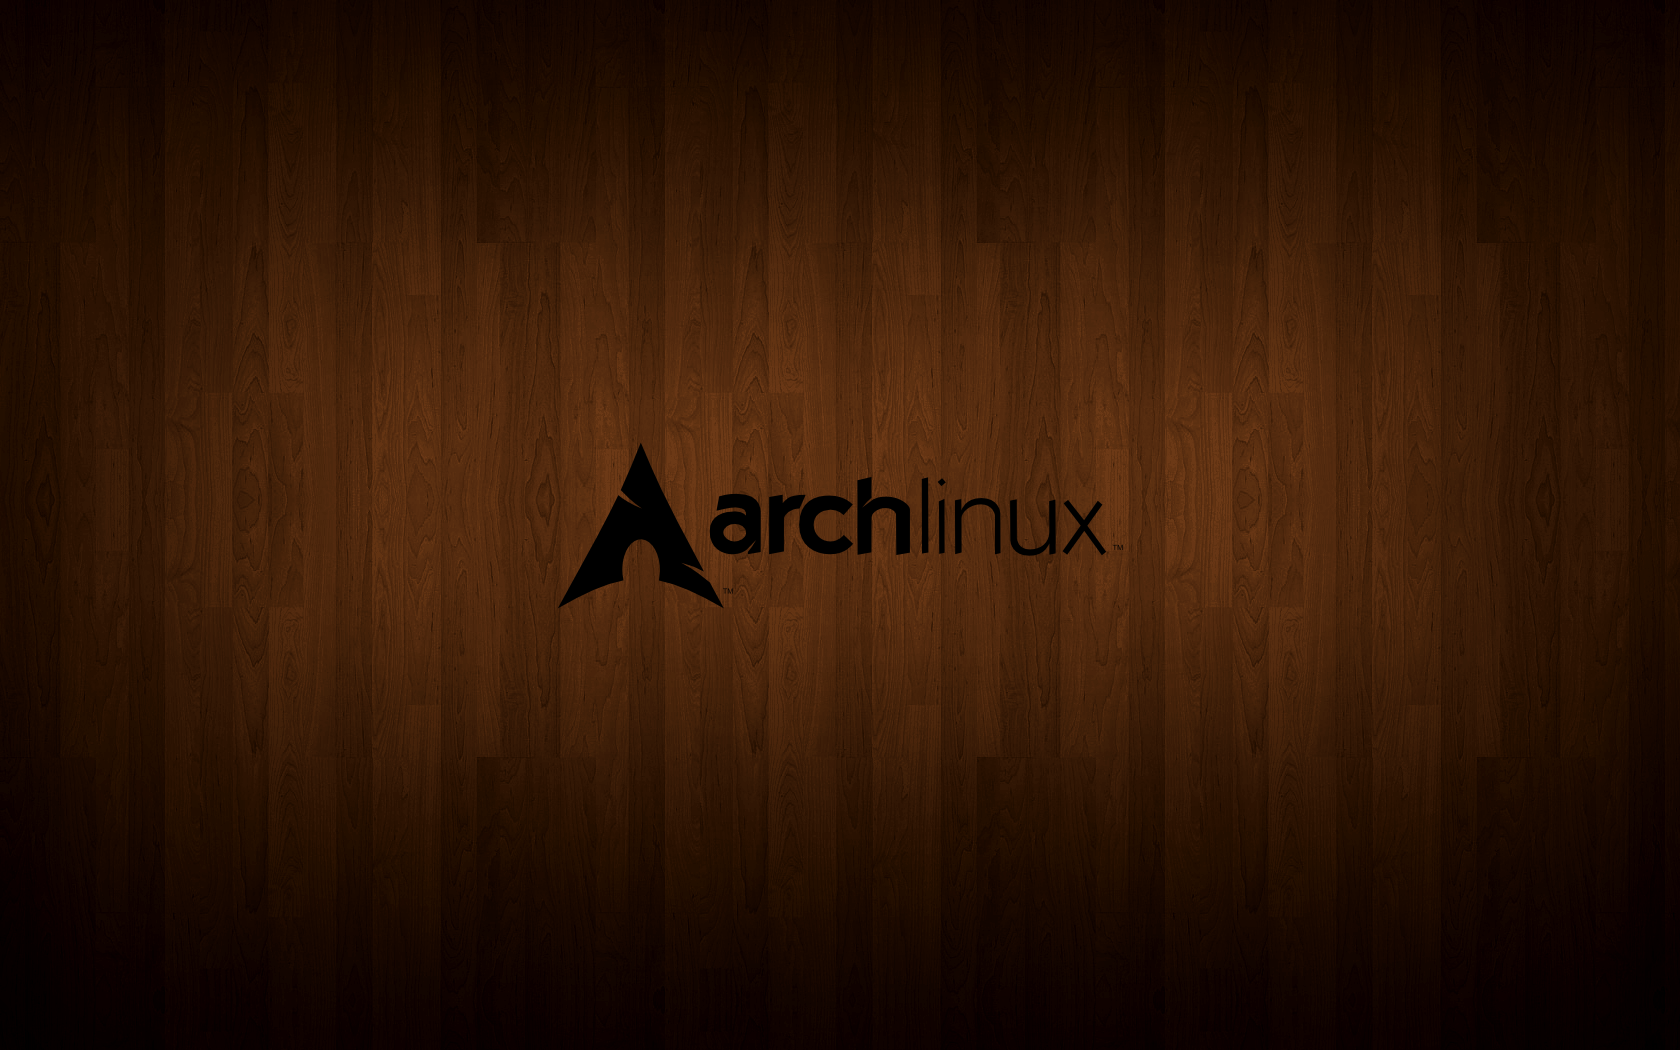 Arch Linux BW Wallpaper by thales img on DeviantArt